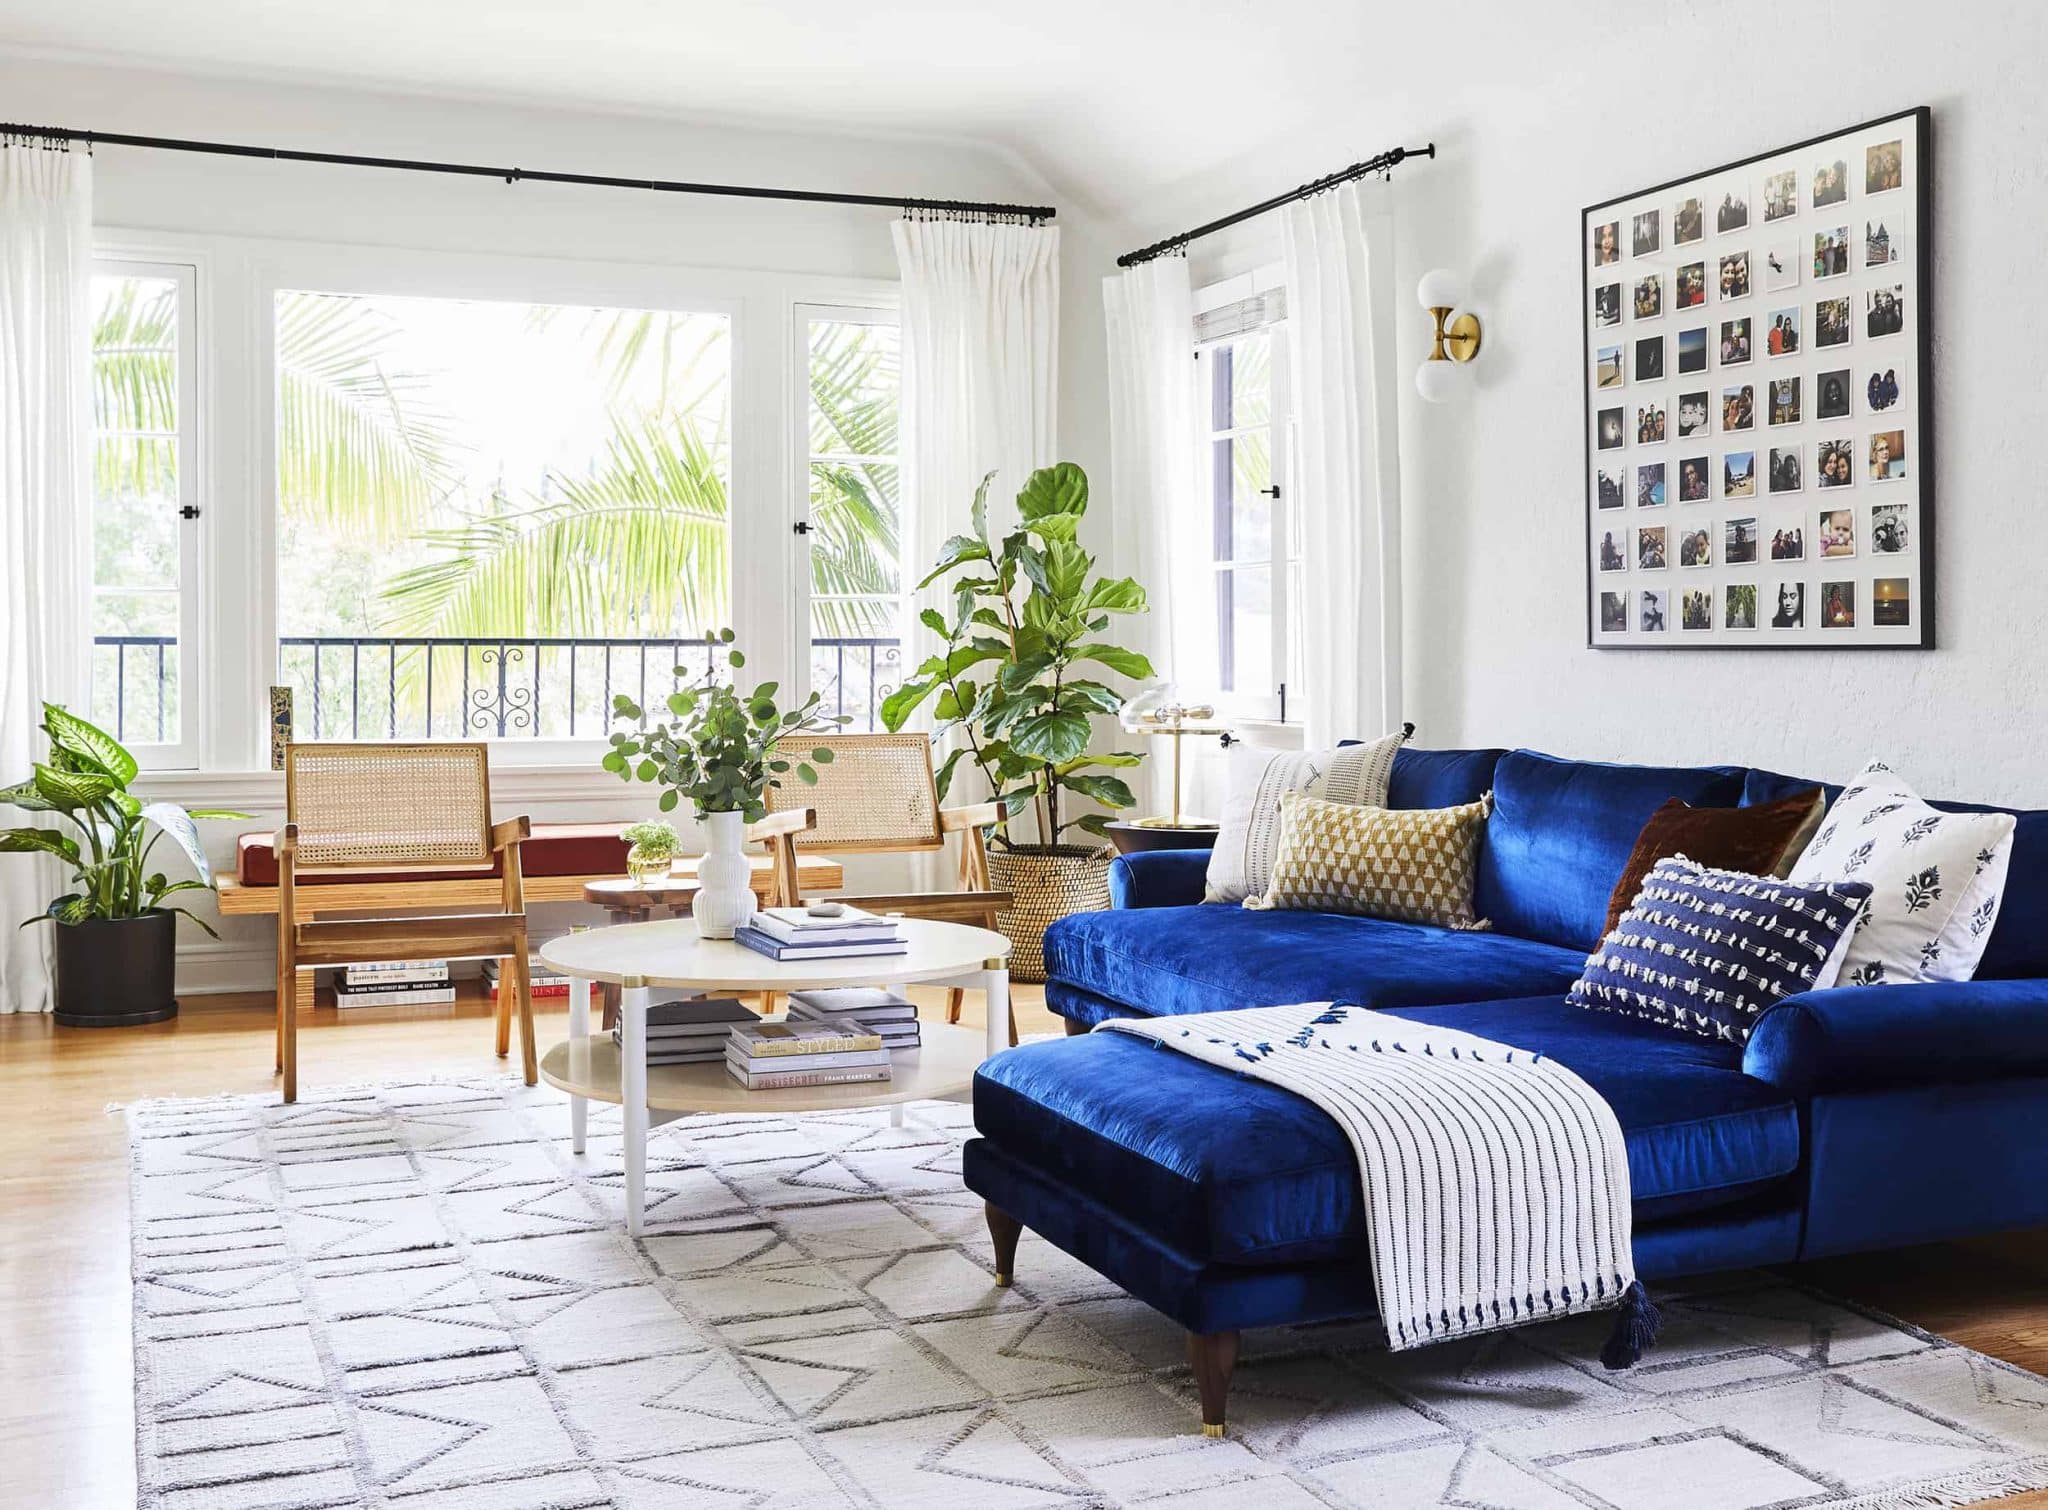 Which wall colors make a blue velvet sofa stand out